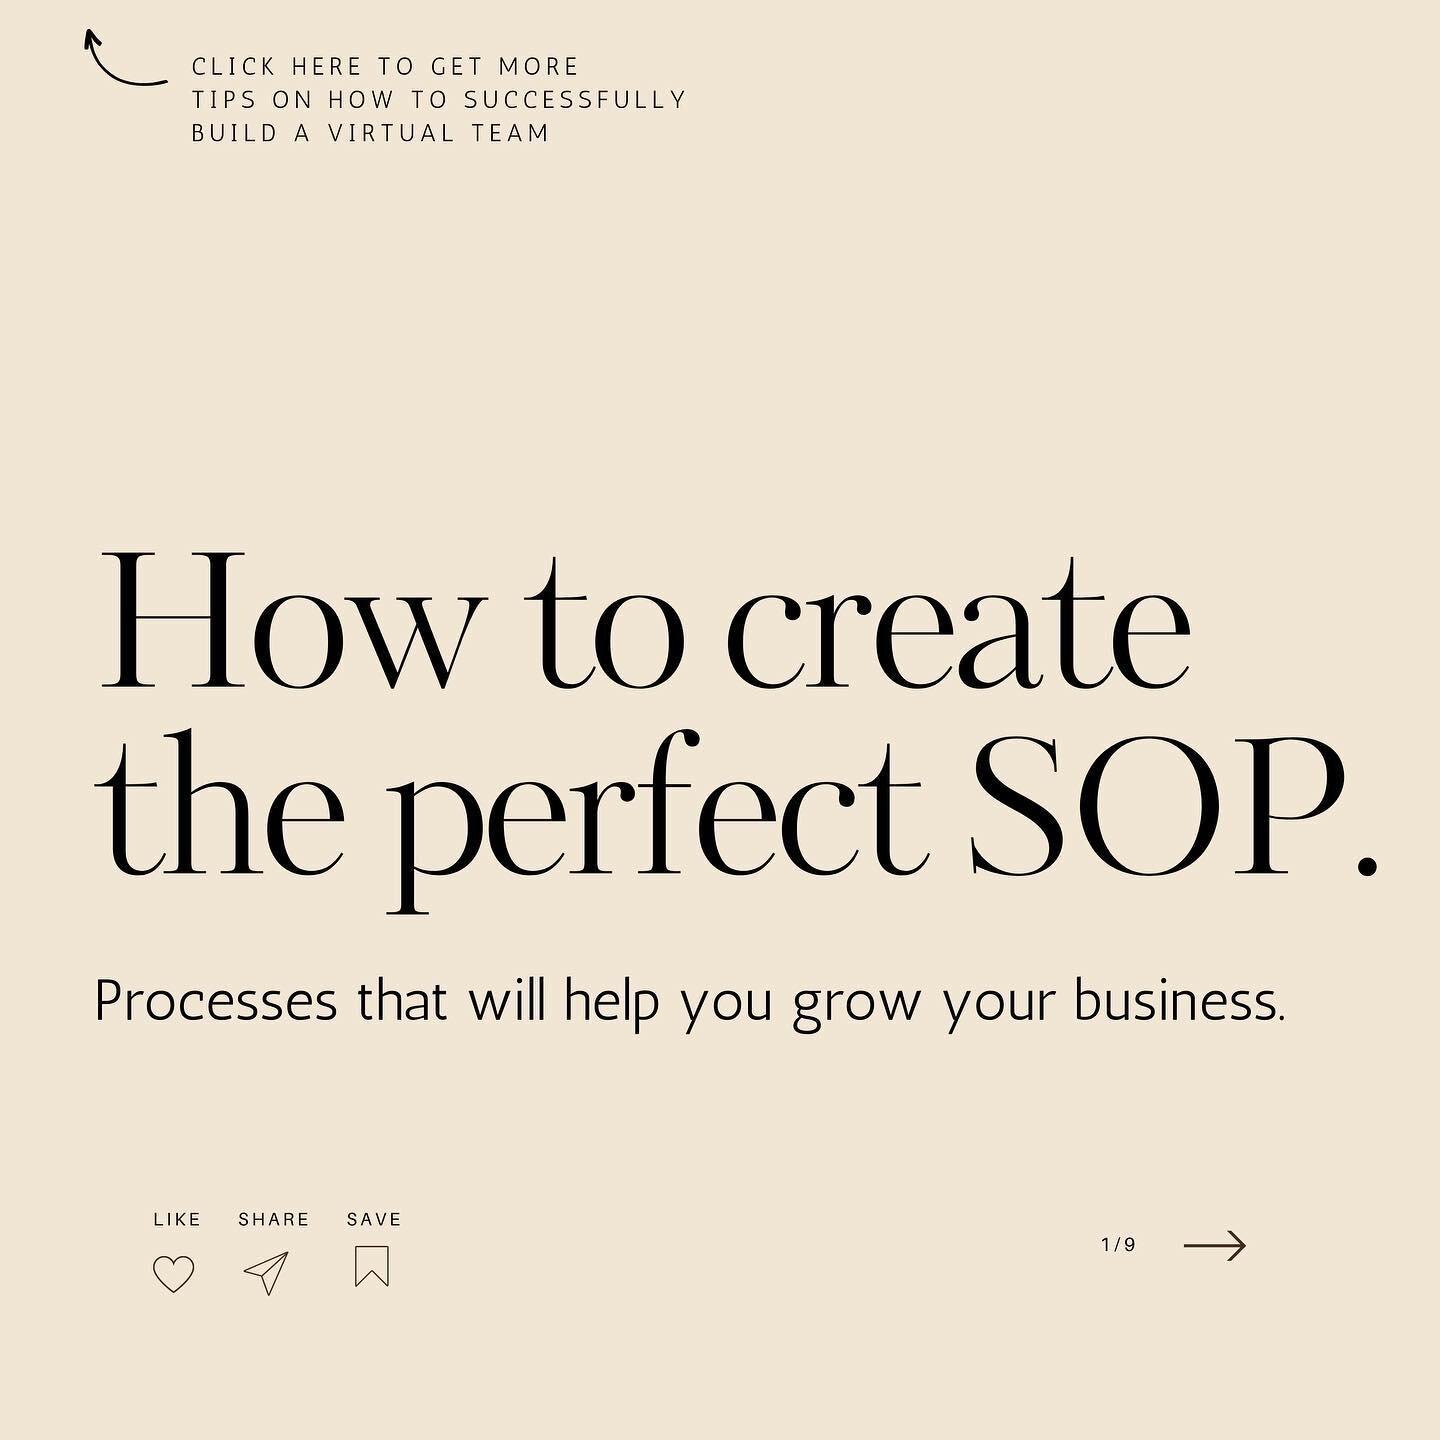 How to create the perfect SOP 🔥 📄 

Start by identifying who will use your SOP and how they will use the document or process. 

Knowing who you&rsquo;re writing for will help you decide what to include.

Next, break the process into manageable step